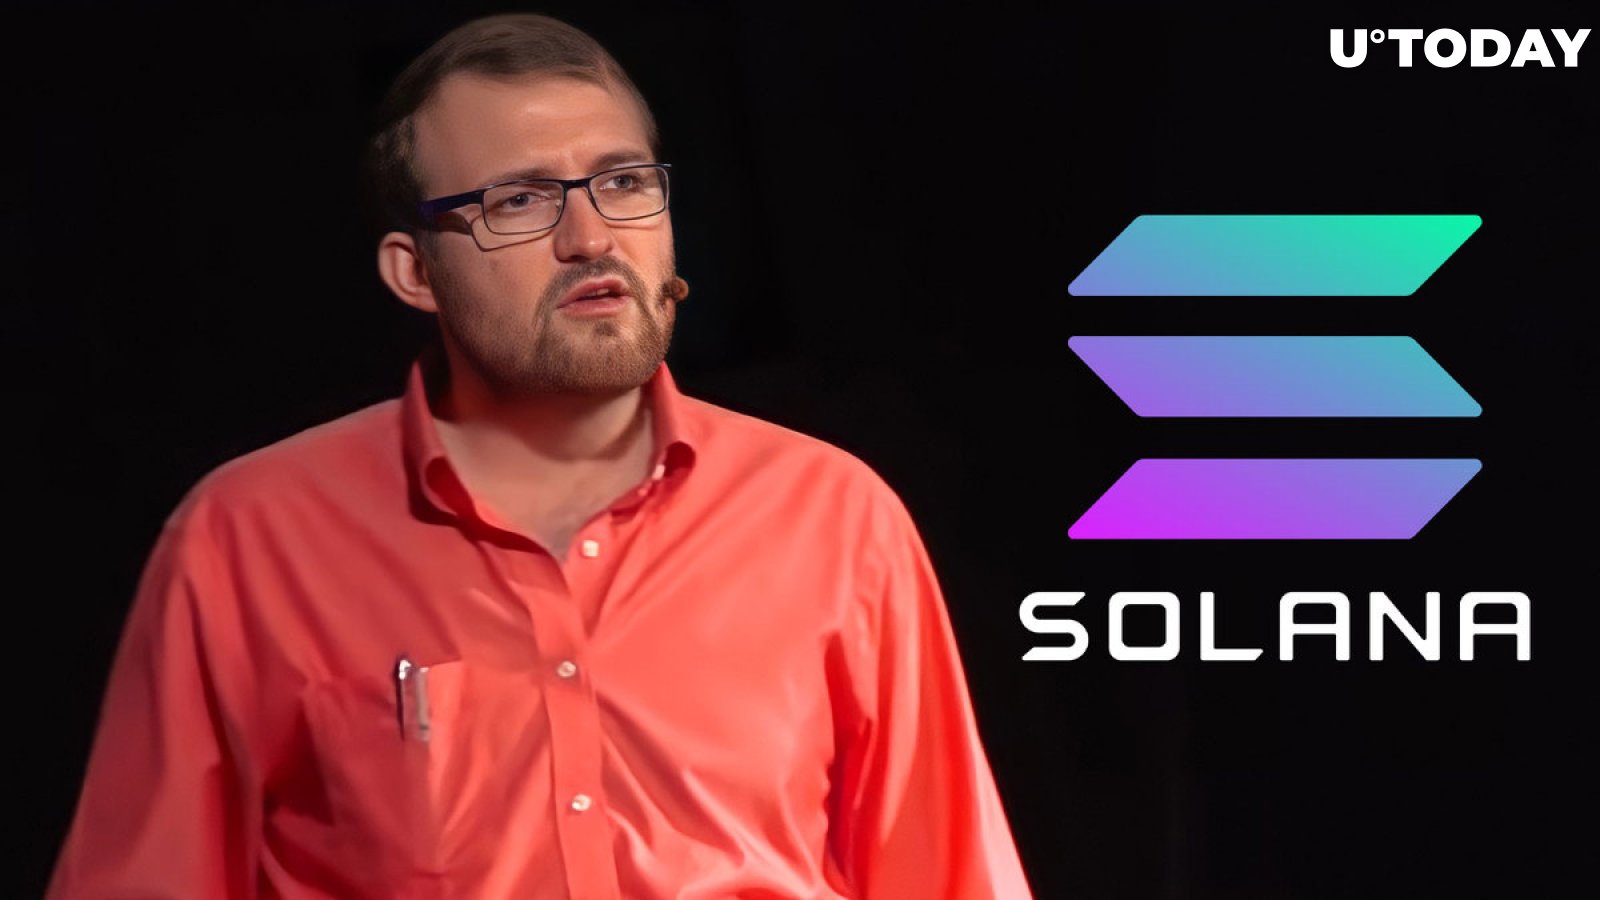 Cardano Founder Takes Jab At Solana as Network Experiences New Outage